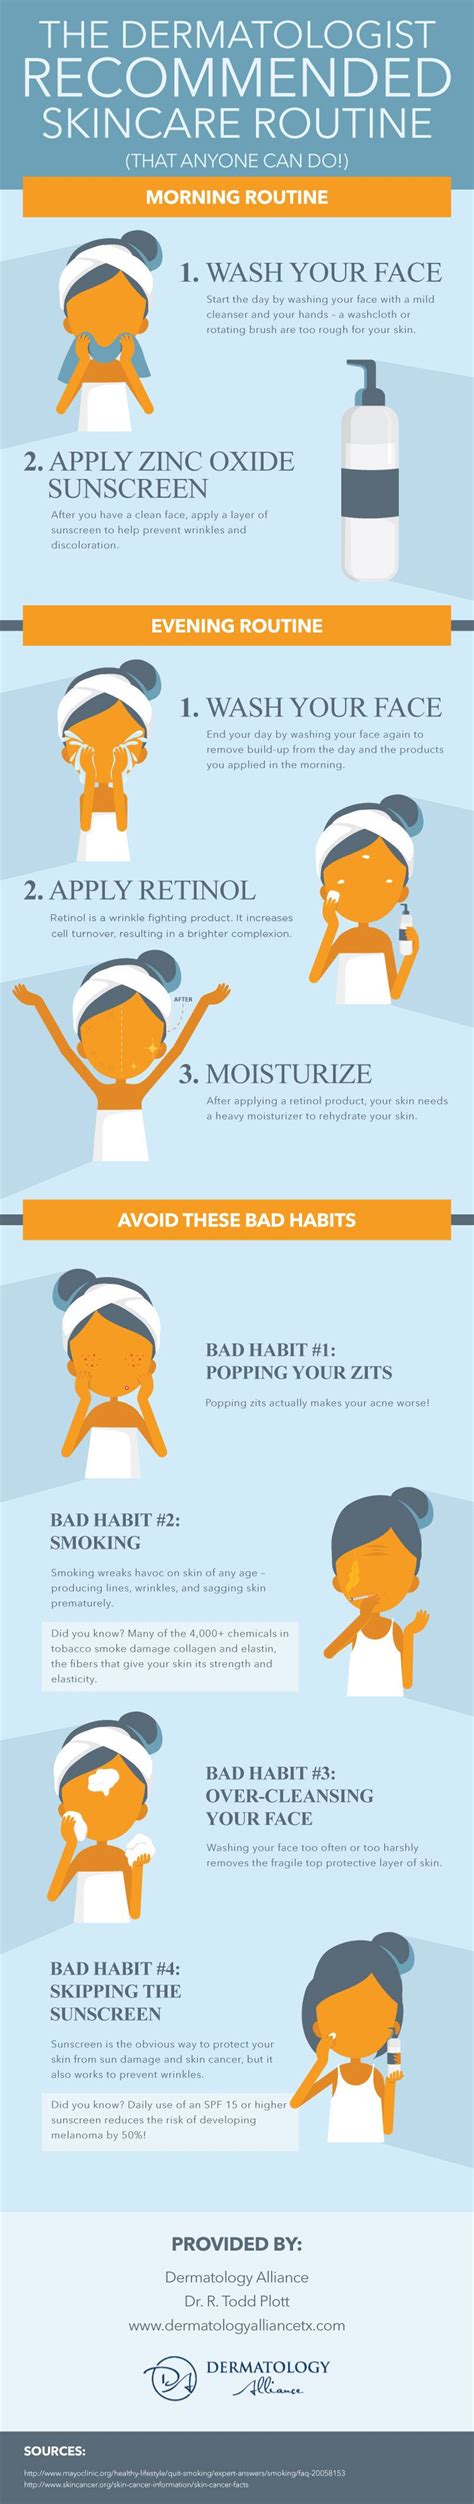 Learn The Smart And Easy Skincare Regimen For The Morning And Evening